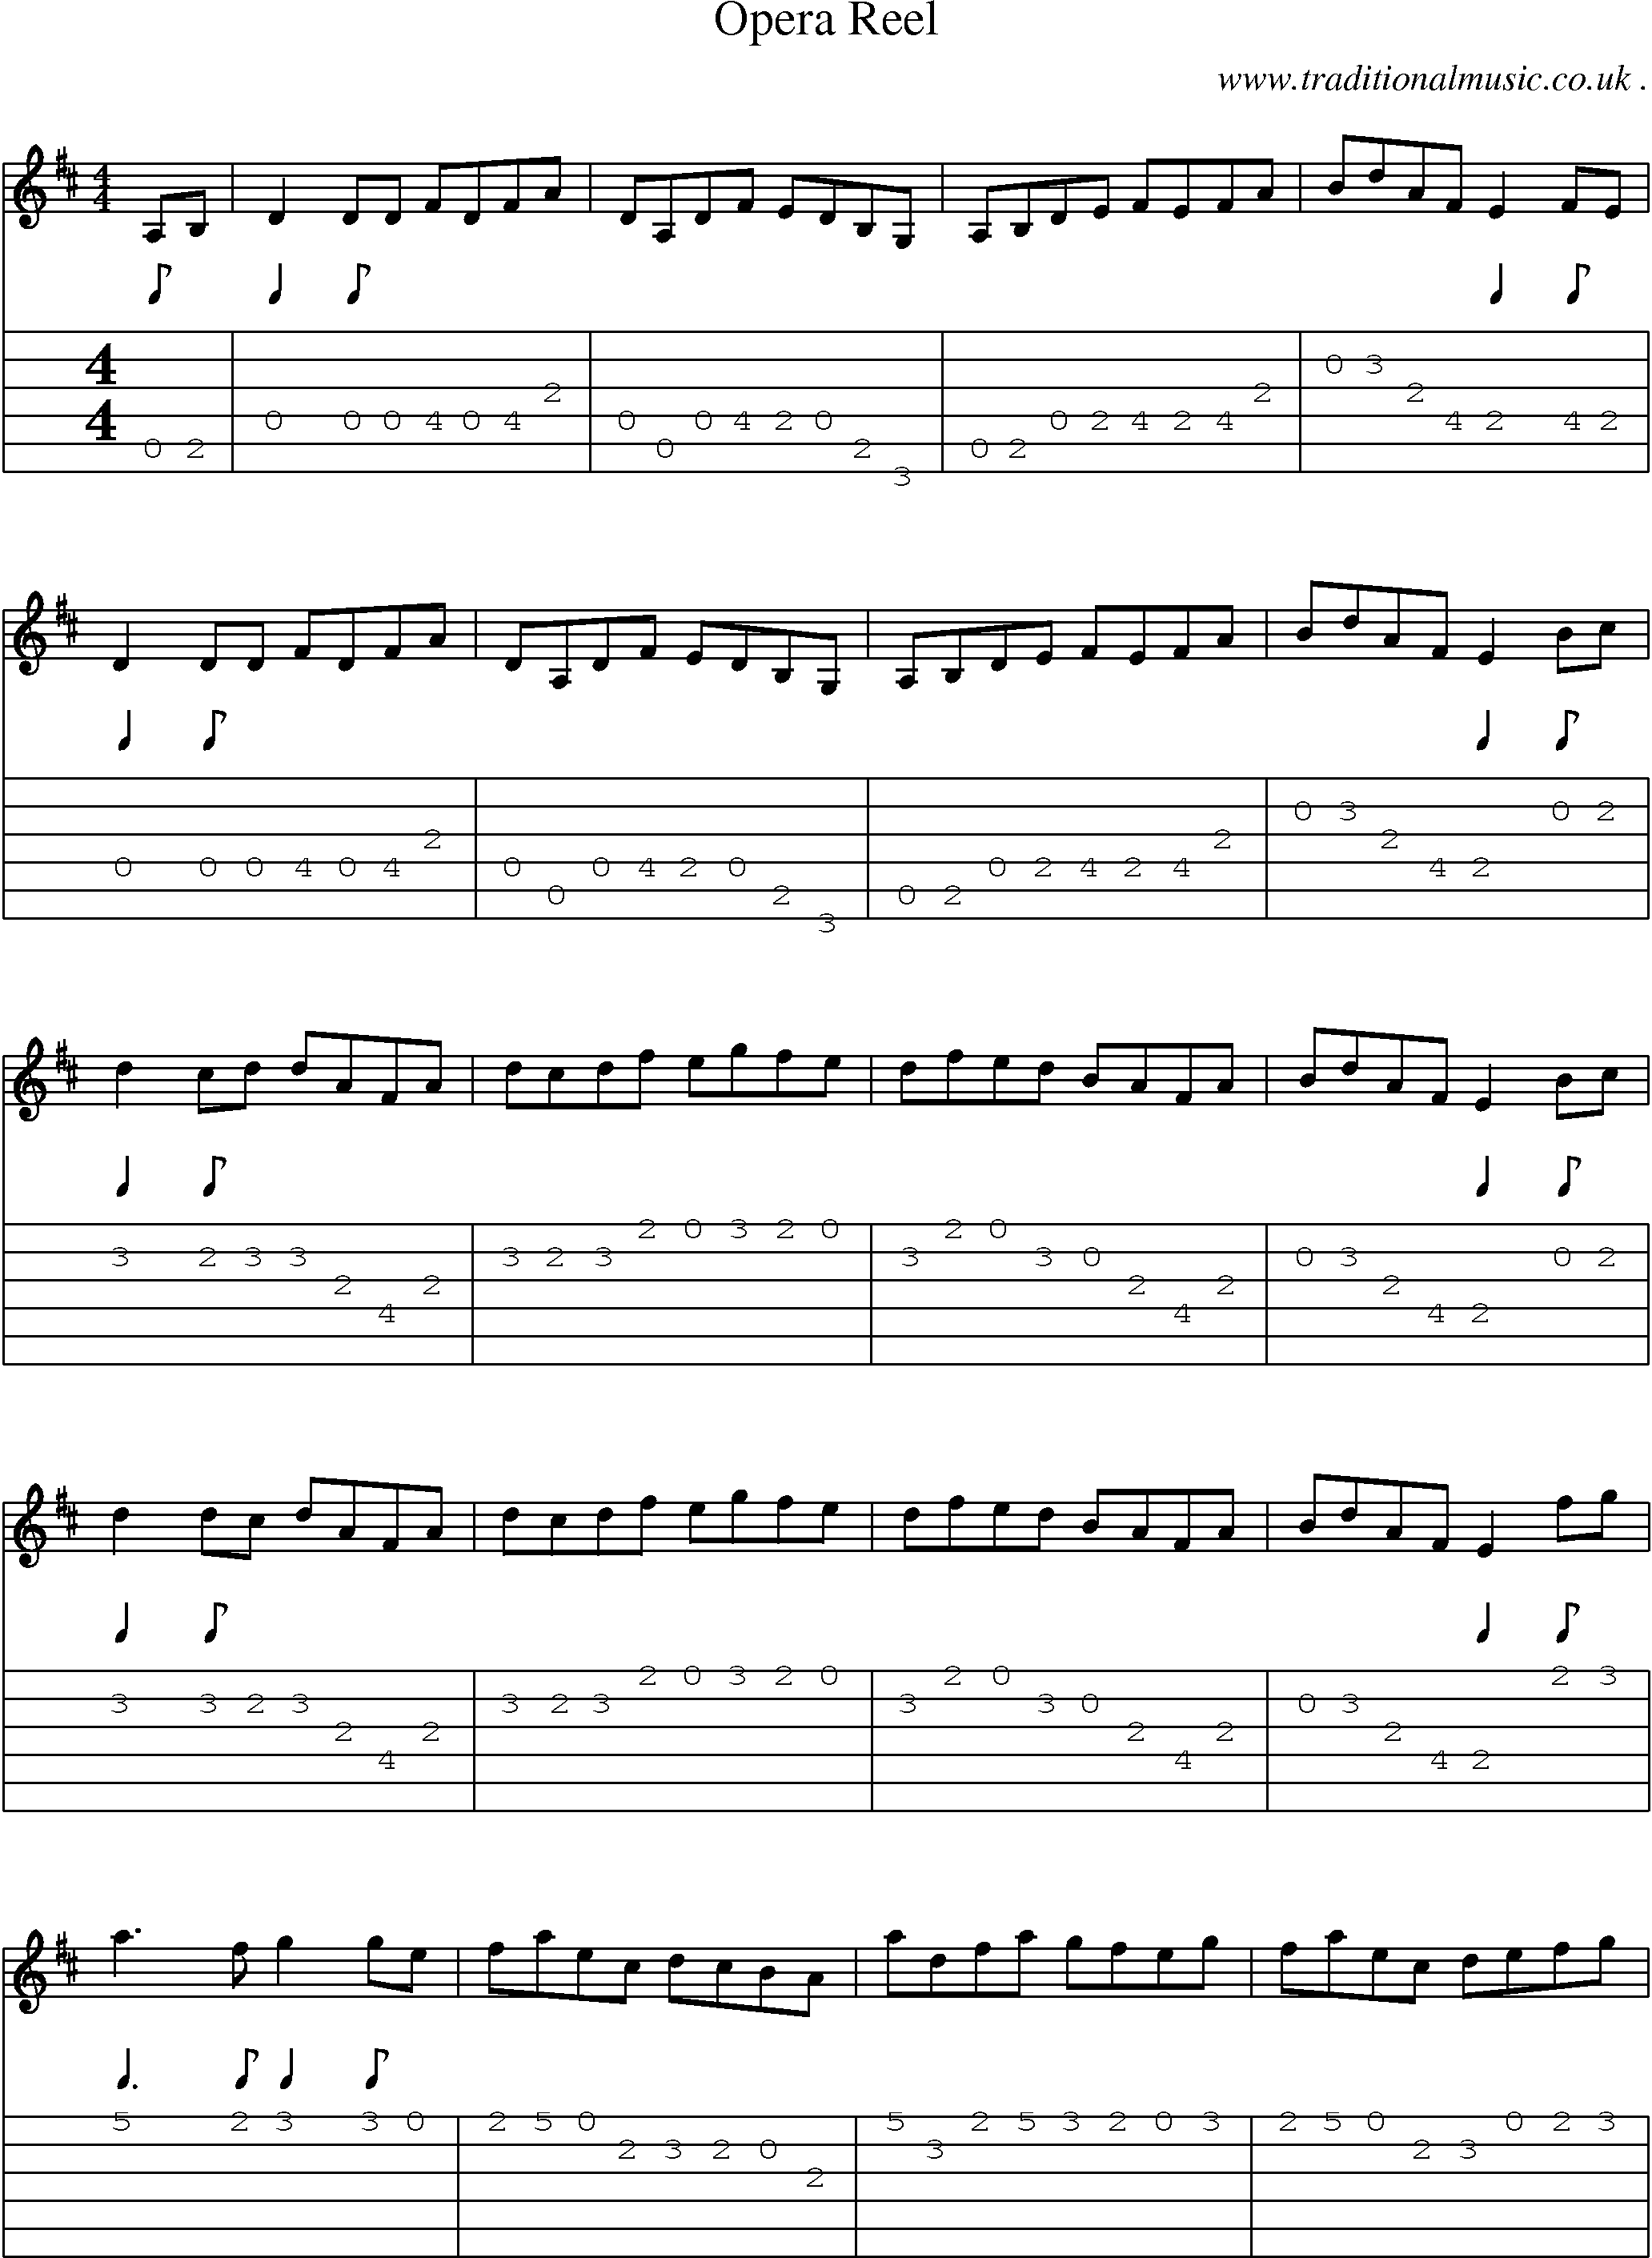 Music Score and Guitar Tabs for Opera Reel